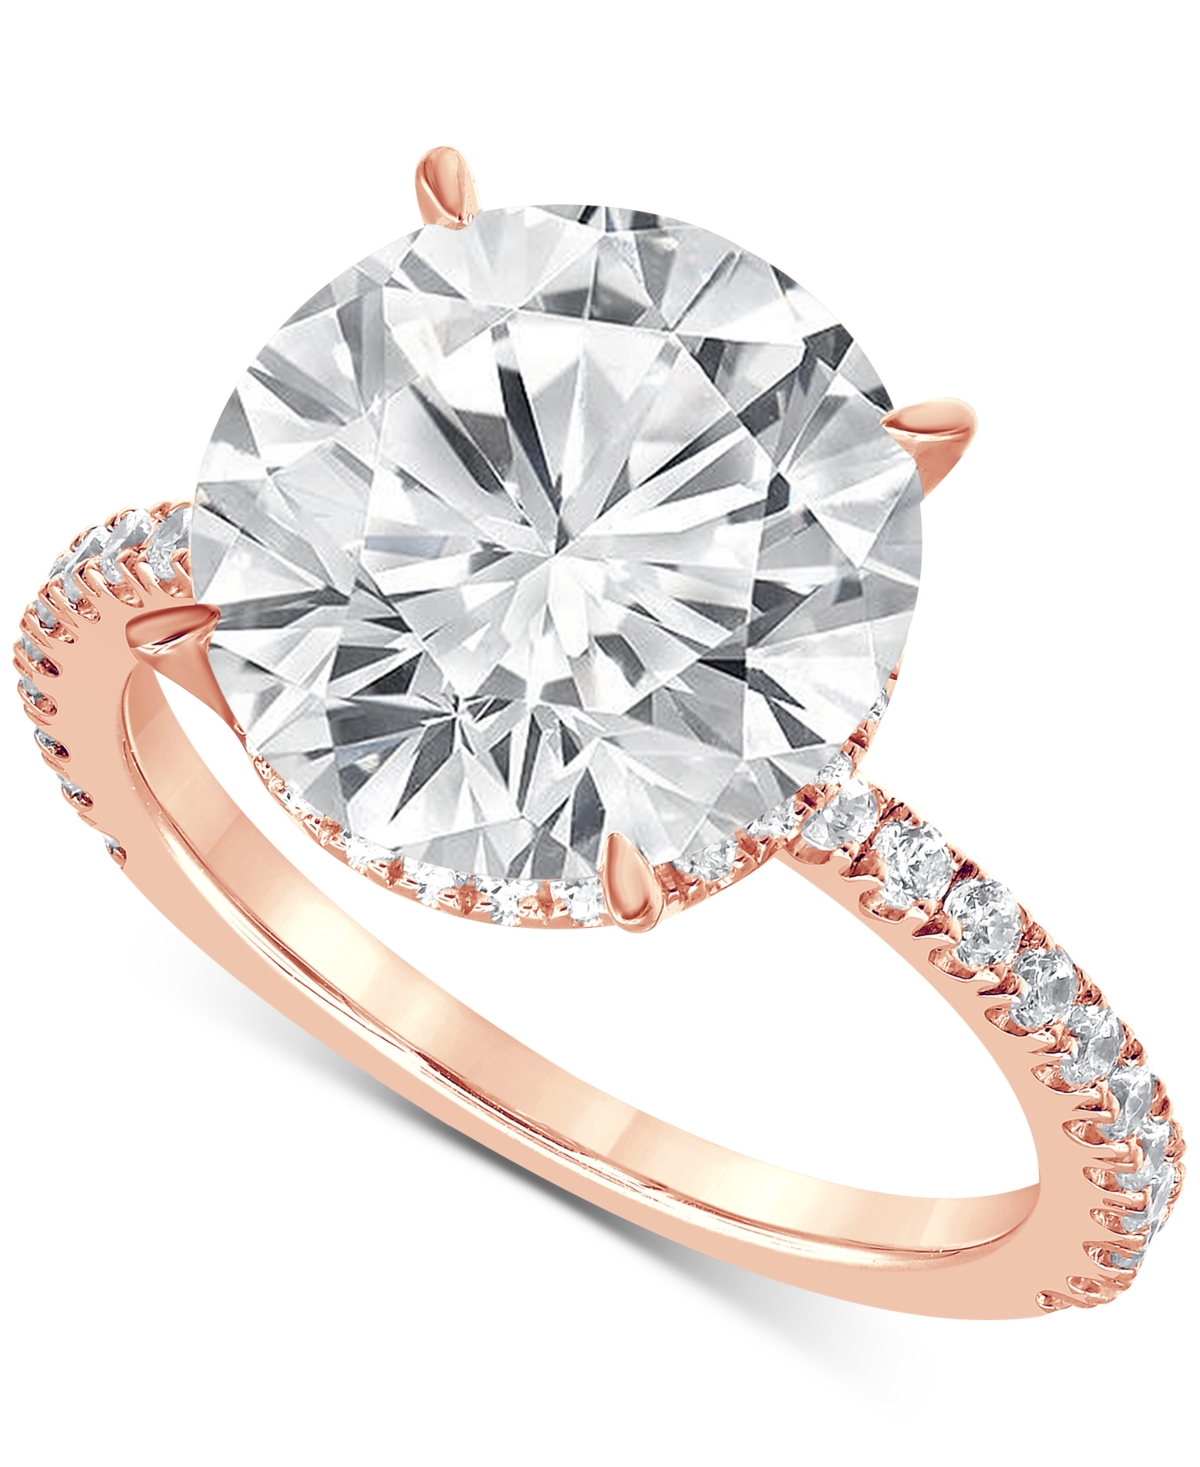 Certified Lab Grown Diamond Hidden Halo Engagement Ring (4 ct. t.w.) in 14k Gold - Rose Gold